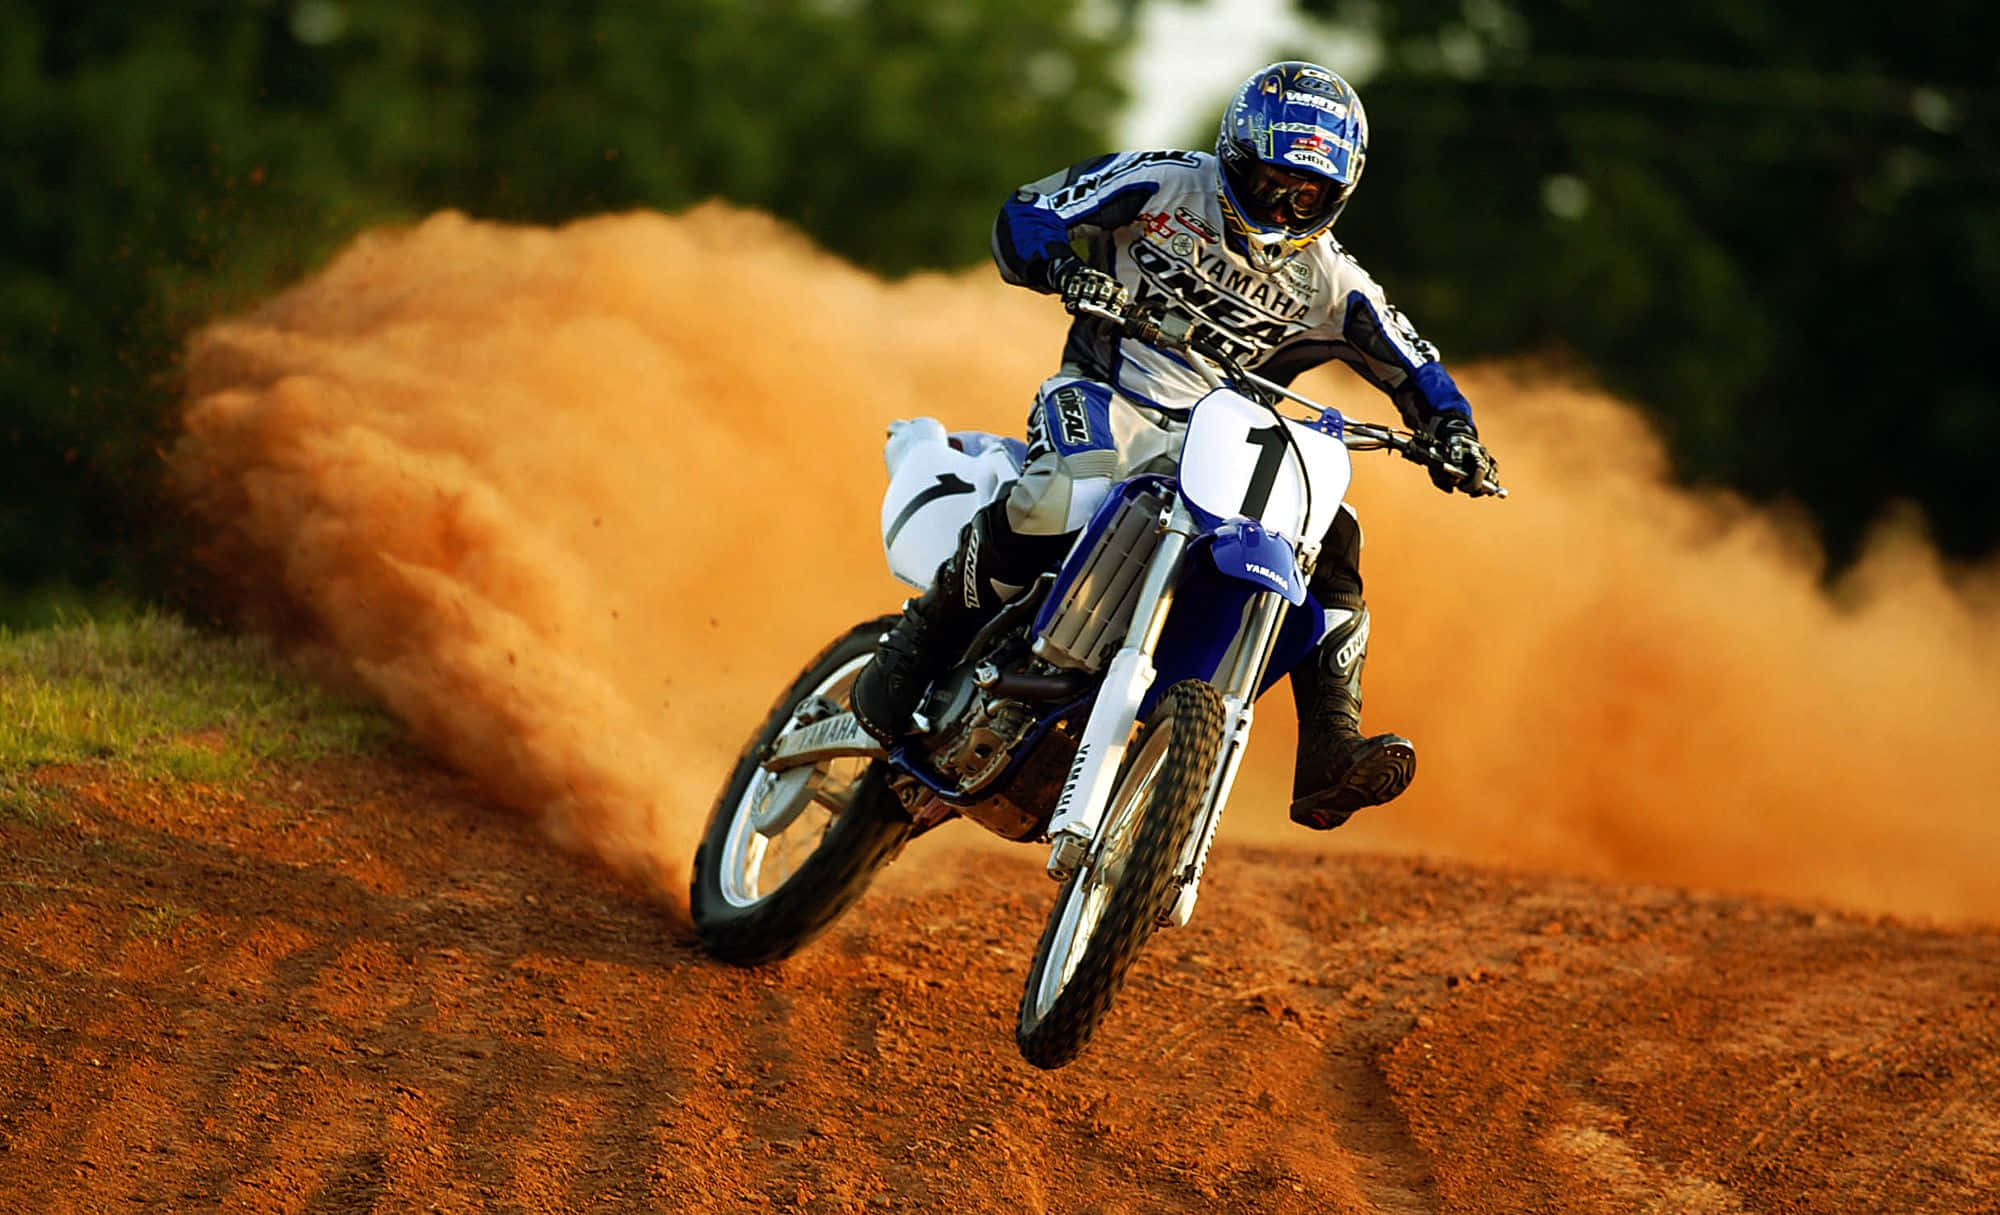 Dirt bike rider catching air on a thrilling outdoor track